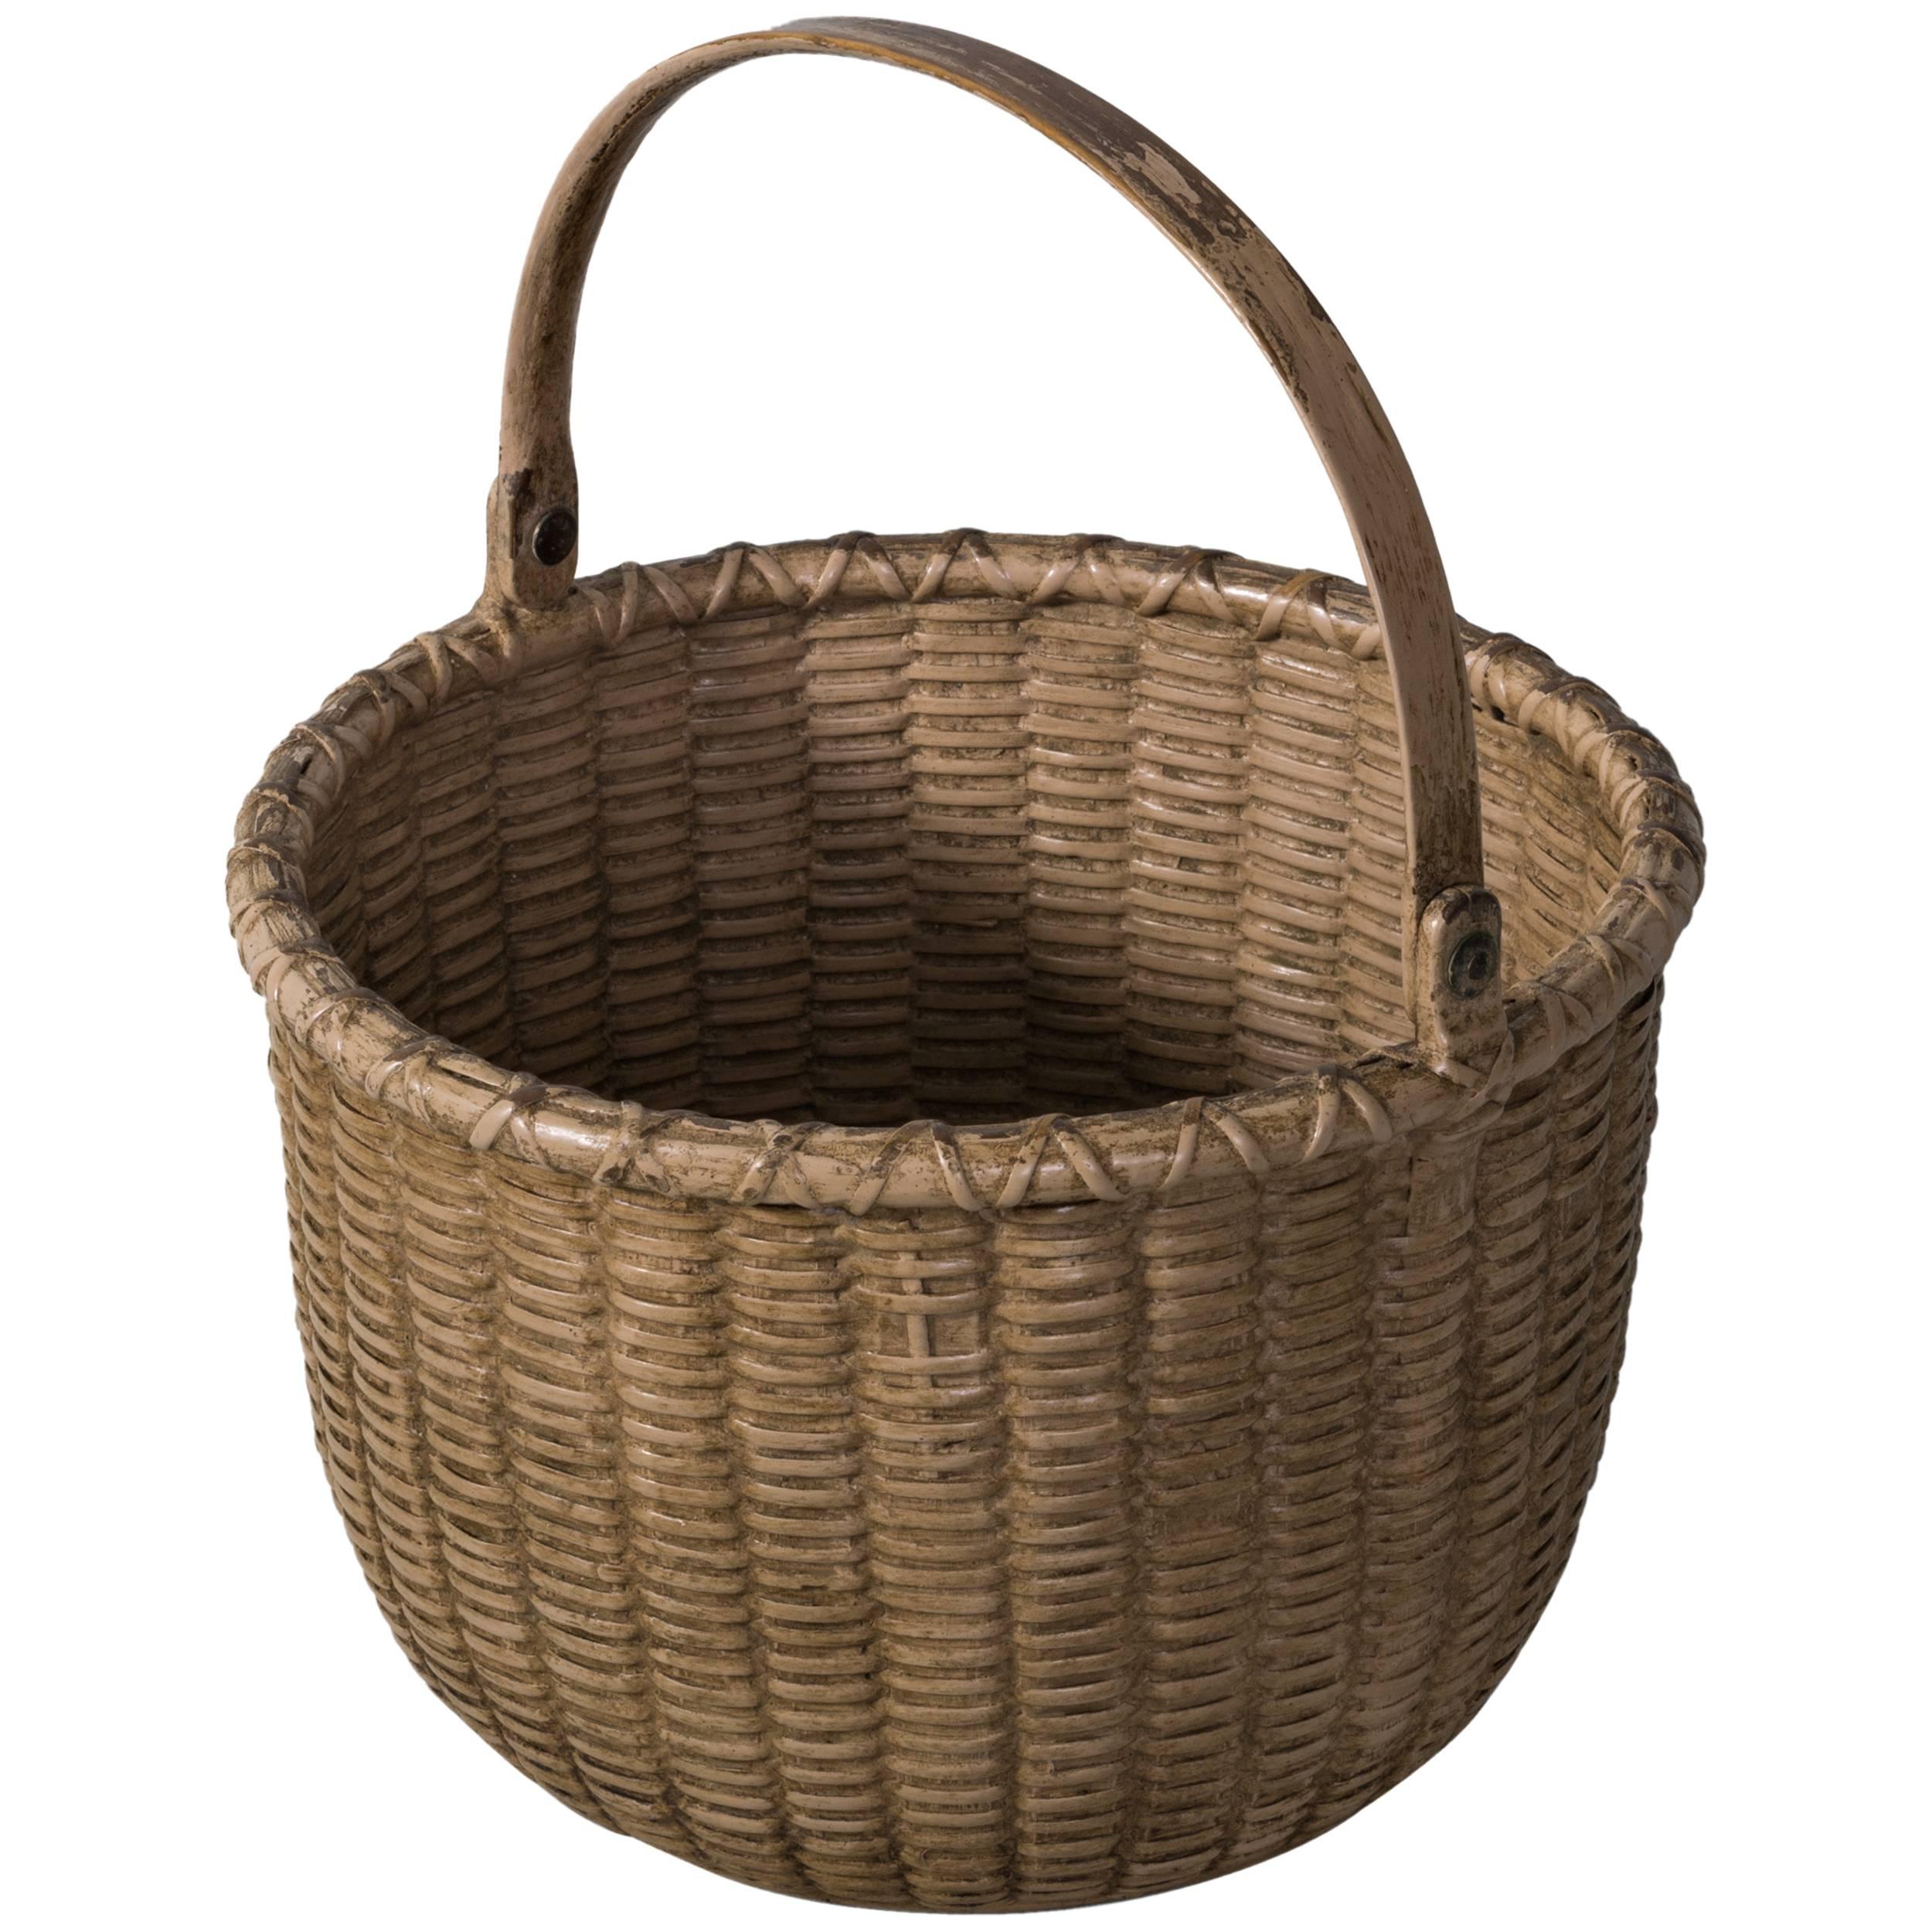 Early Salmon Painted Nantucket Light Ship Basket, Late 19th Century